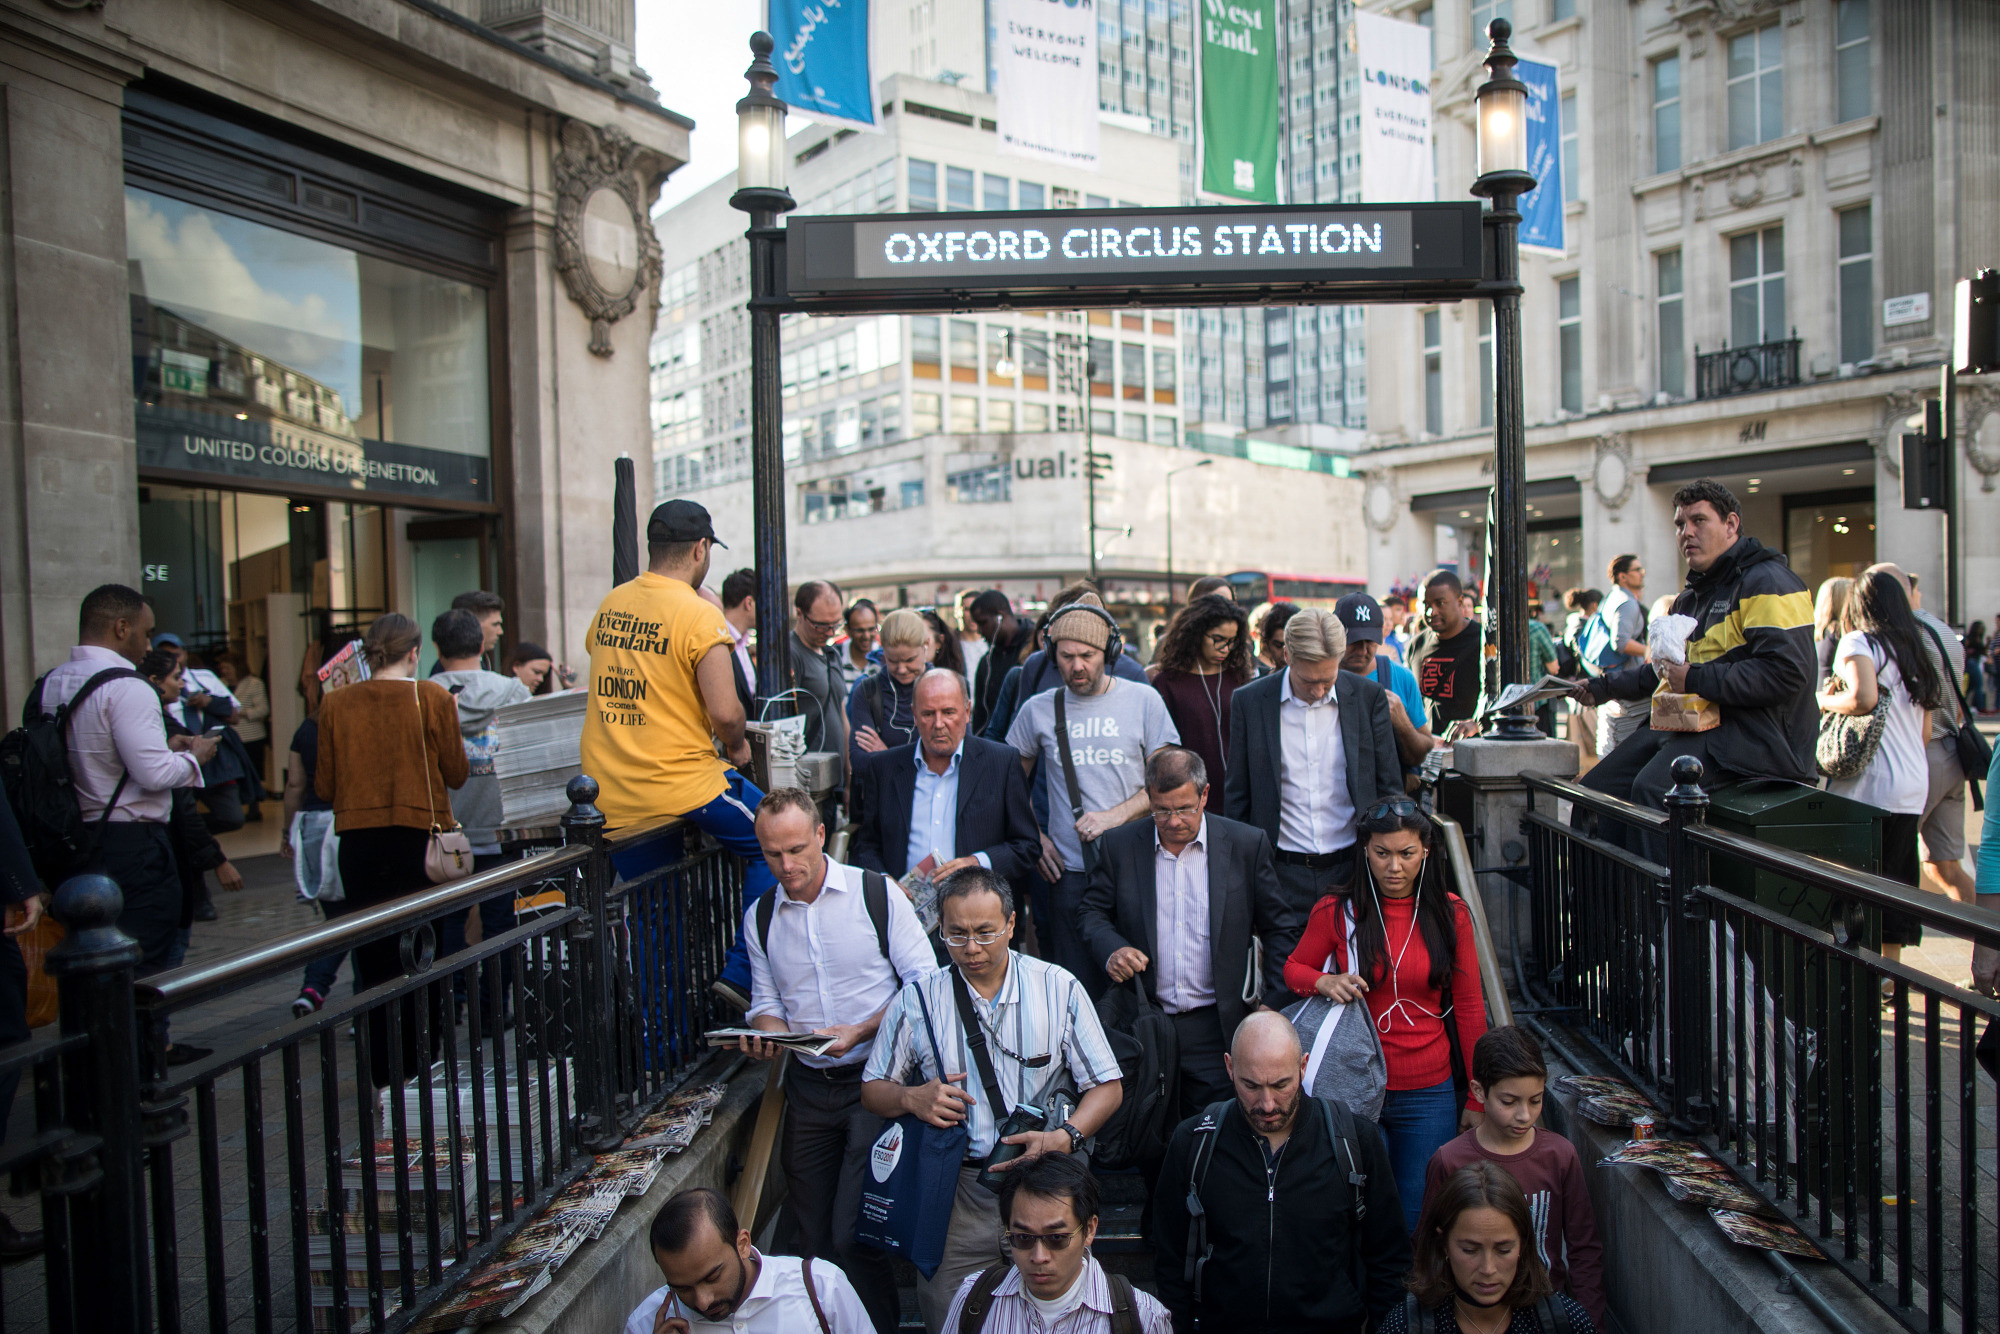 A crowd of pedestrians enter the stairs leading to London Underground metro station at Oxford Circus in 2017.&nbsp;